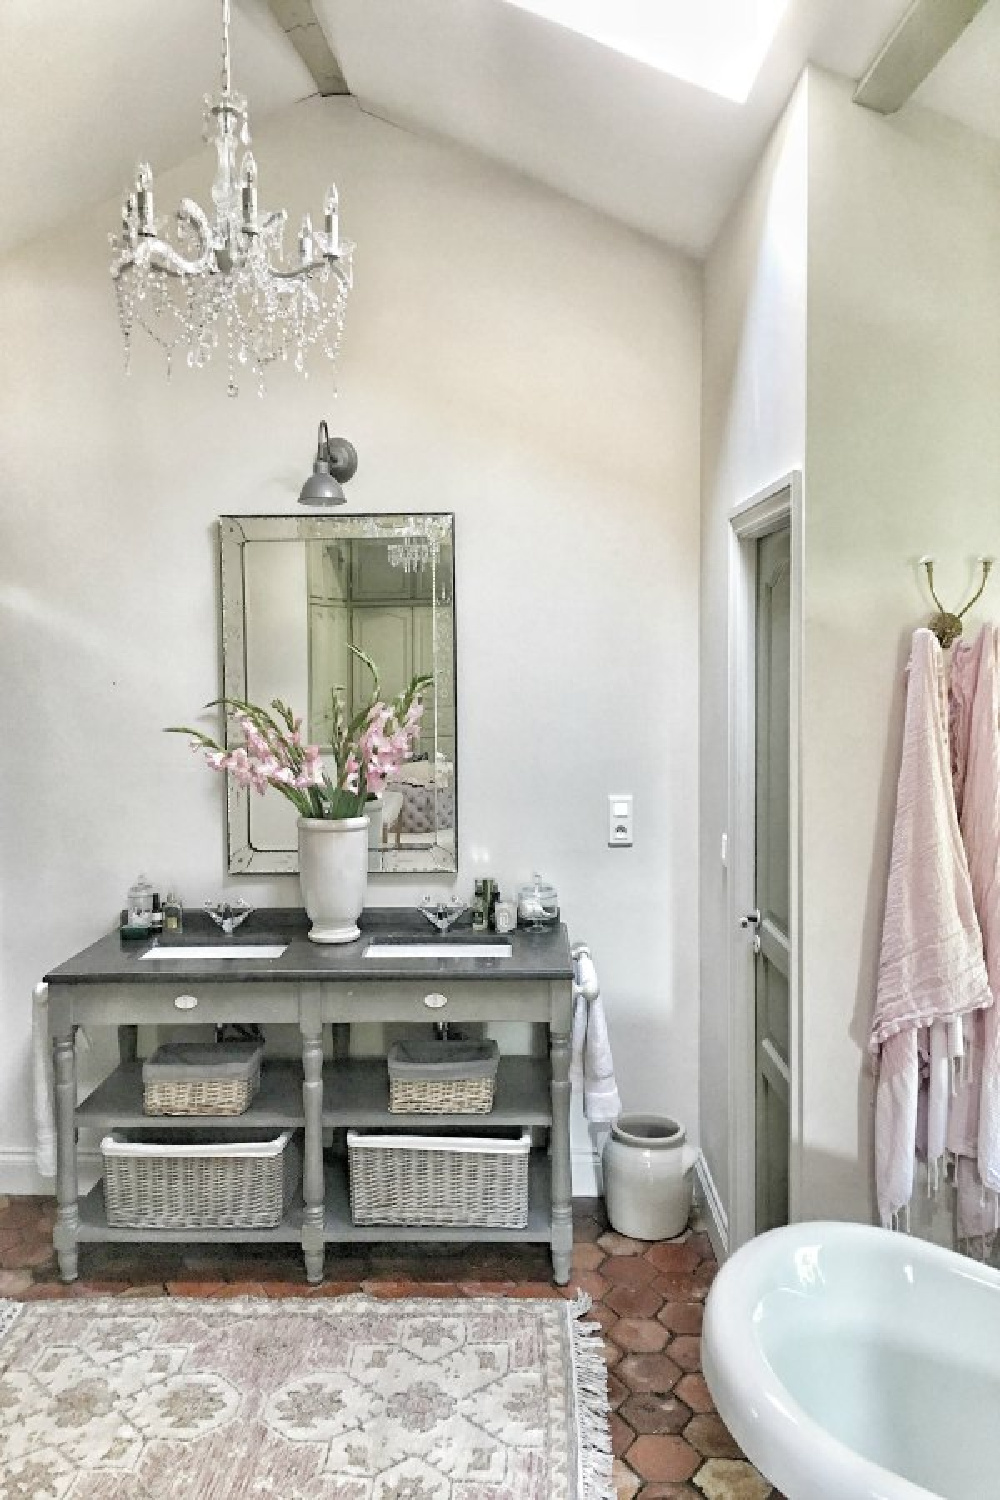 The renovated bathroom in this country house near Bordeaux by Vivi et Margot feels authentic and original. #bathroomdesign #frenchcountry #oldworldstyle #frenchhome #romanticbathroom